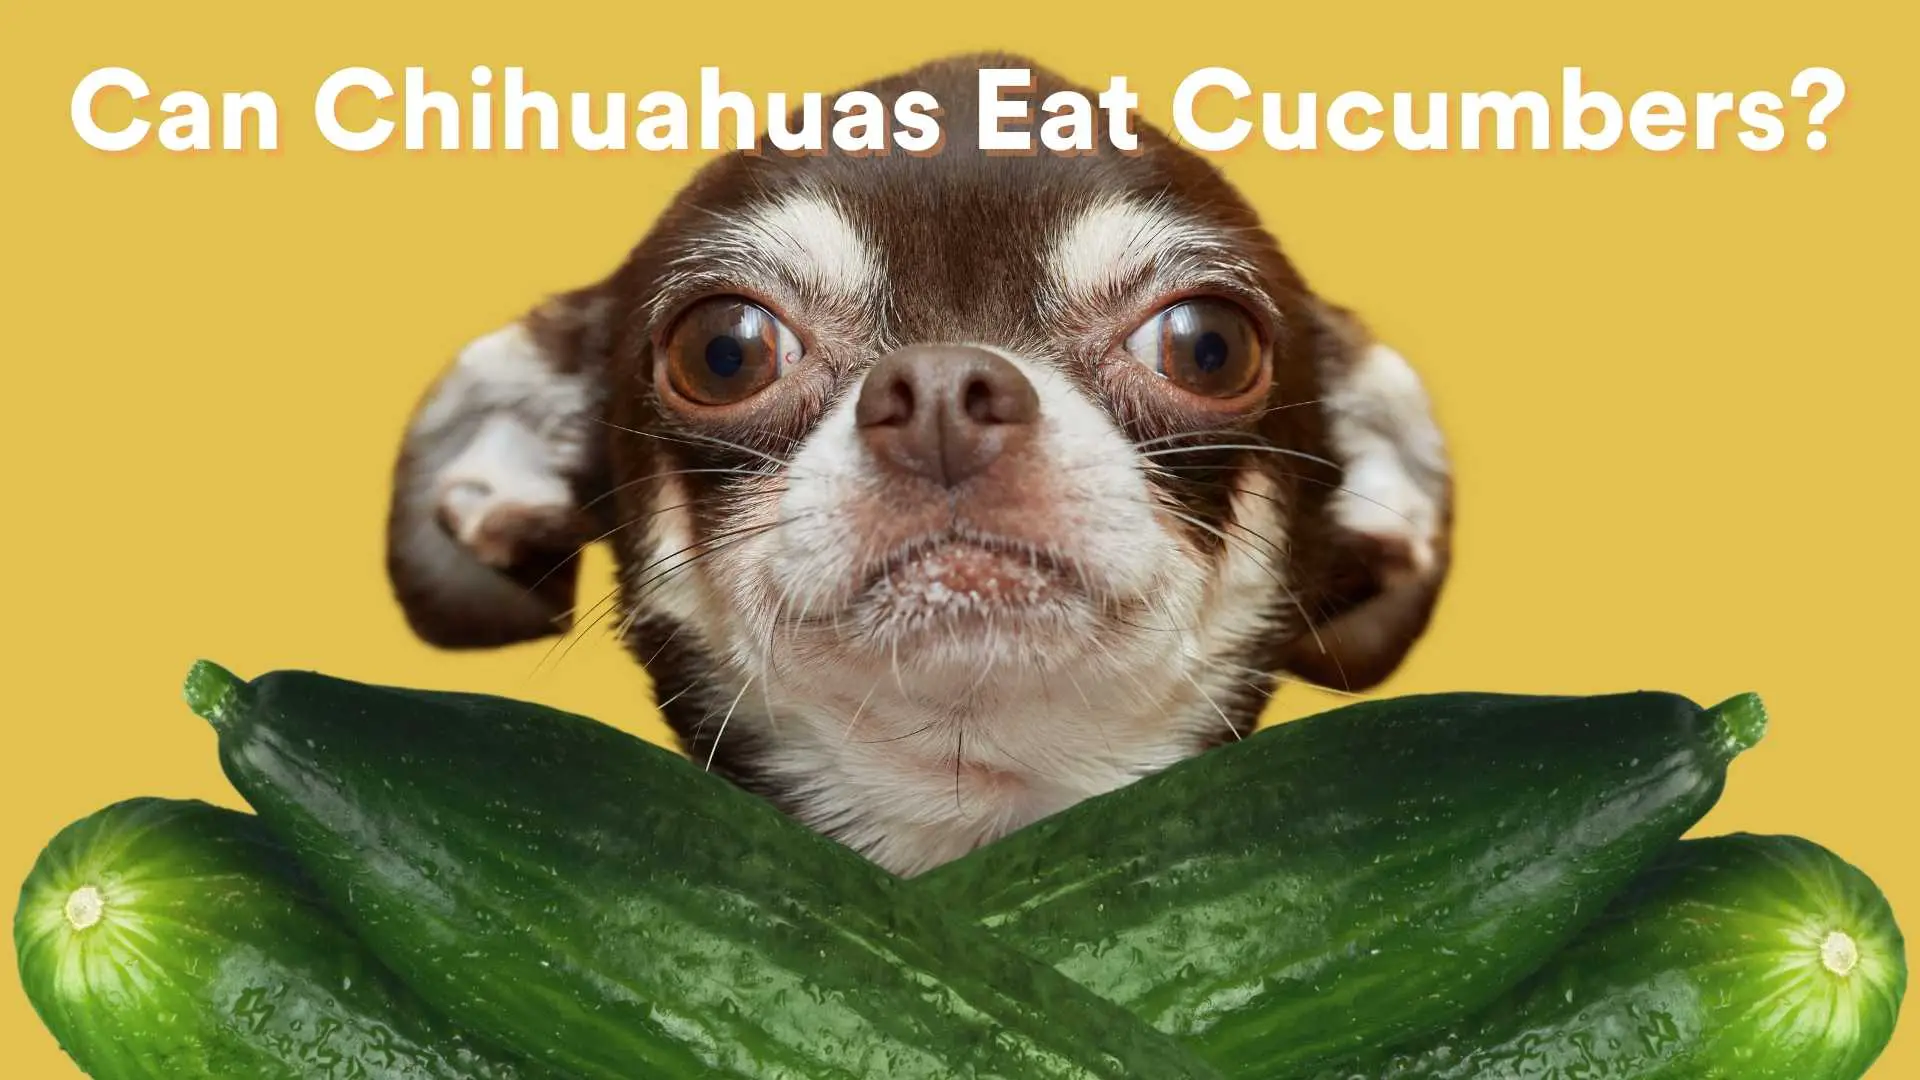 Can Chihuahuas Eat Cucumbers?